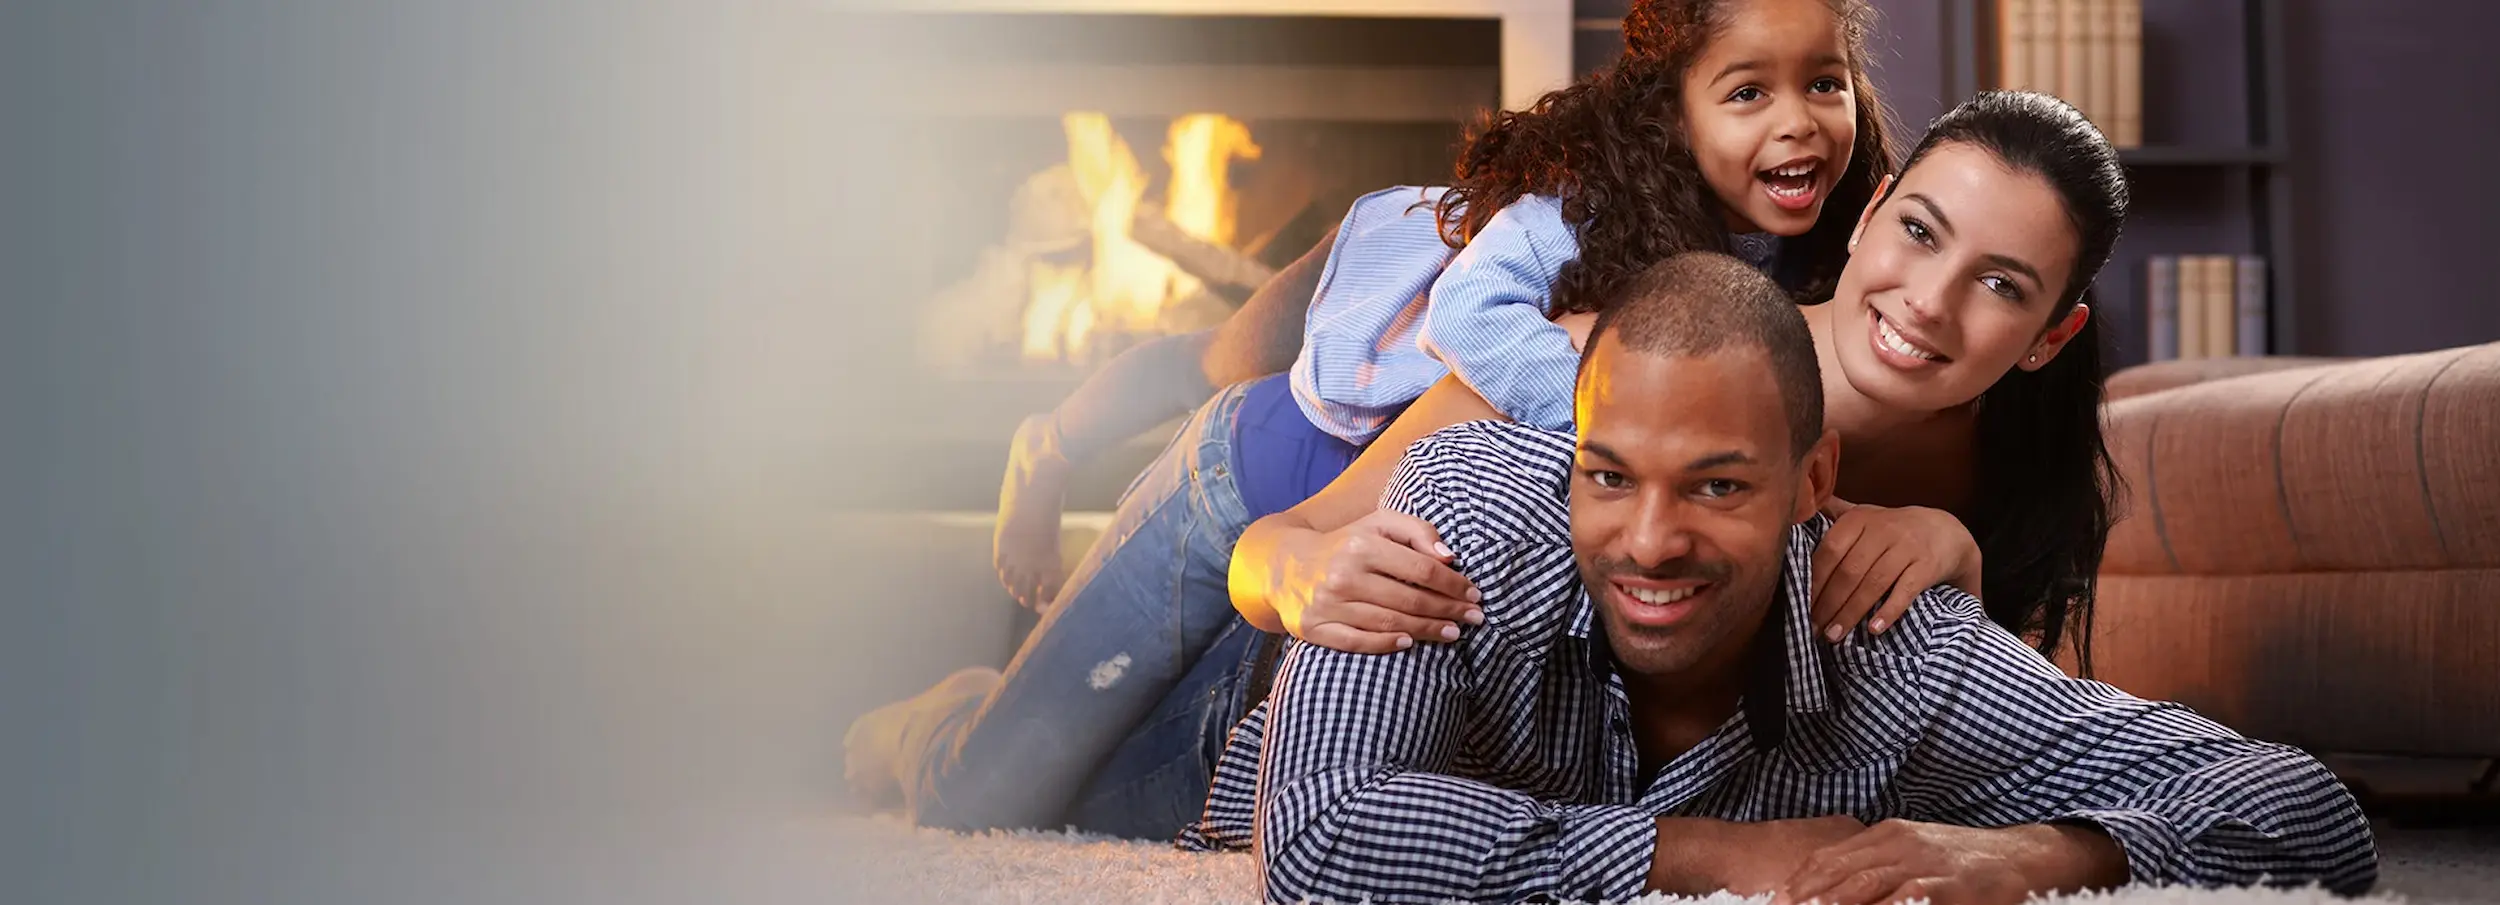 Smiling African American couple with child laying piled on rug in living room in front of fireplace.